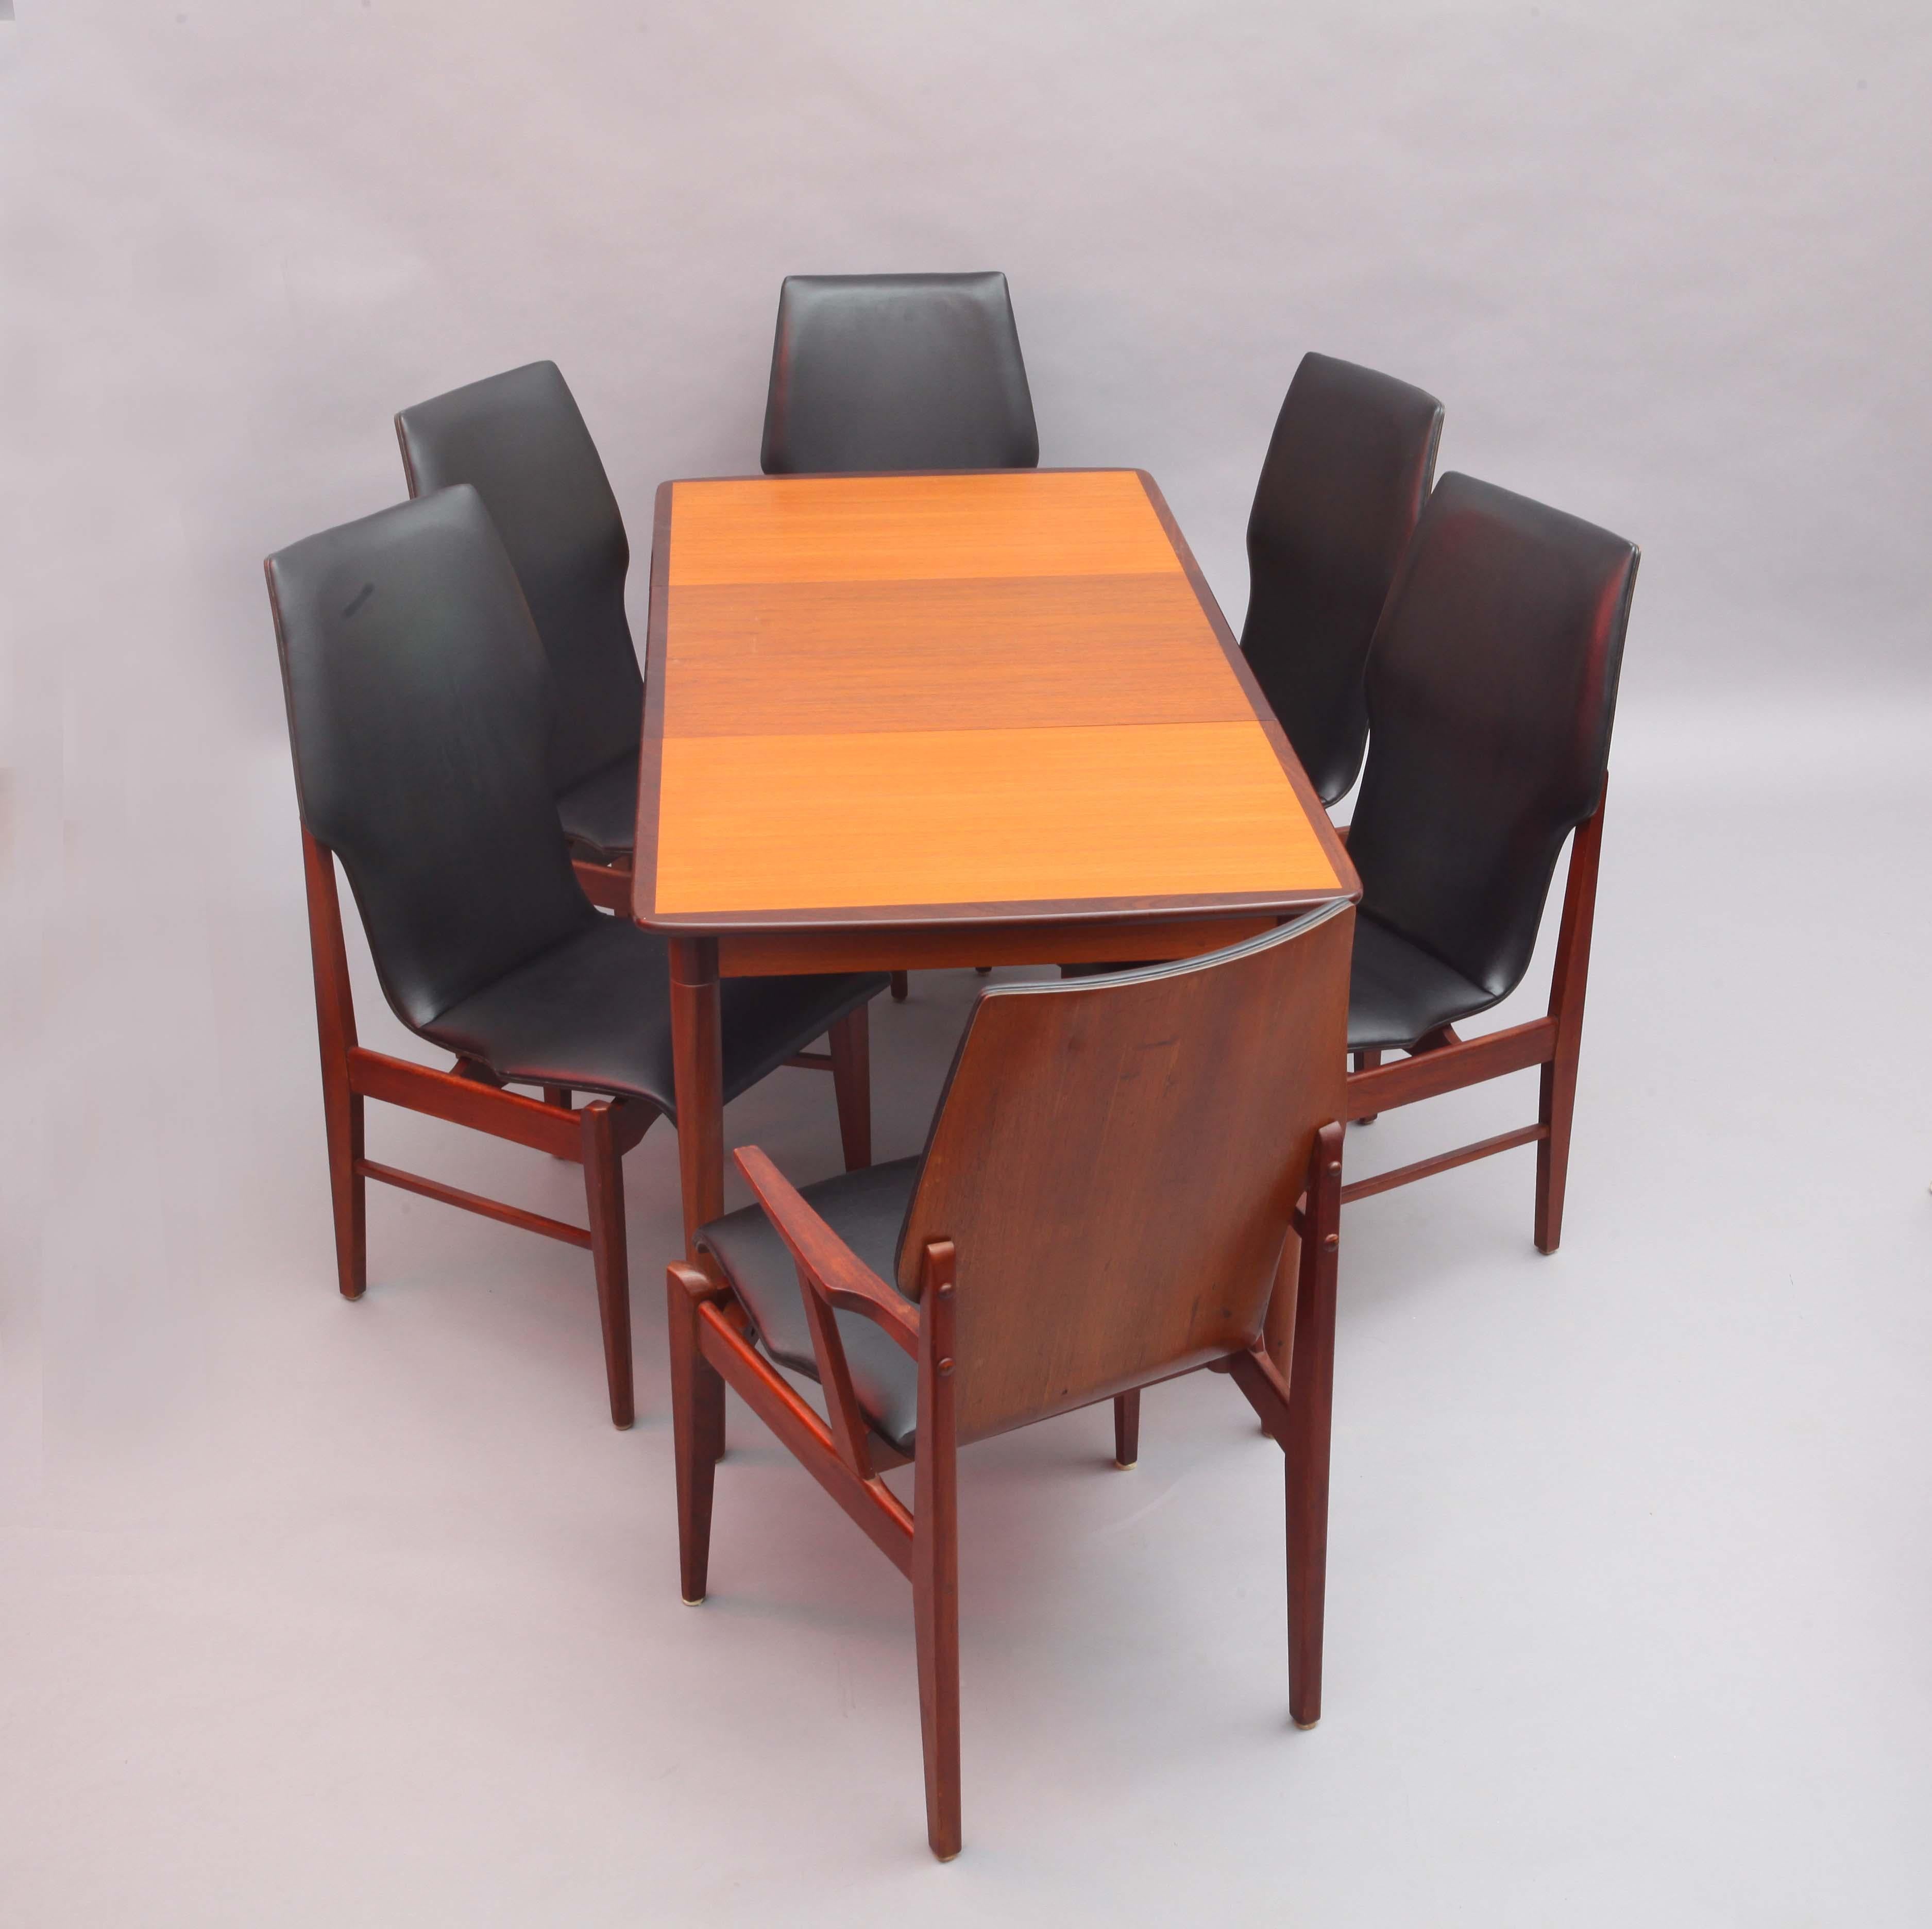 Extendable dining table with six chairs
Denmark, 1950
teak wood,
leatherette.